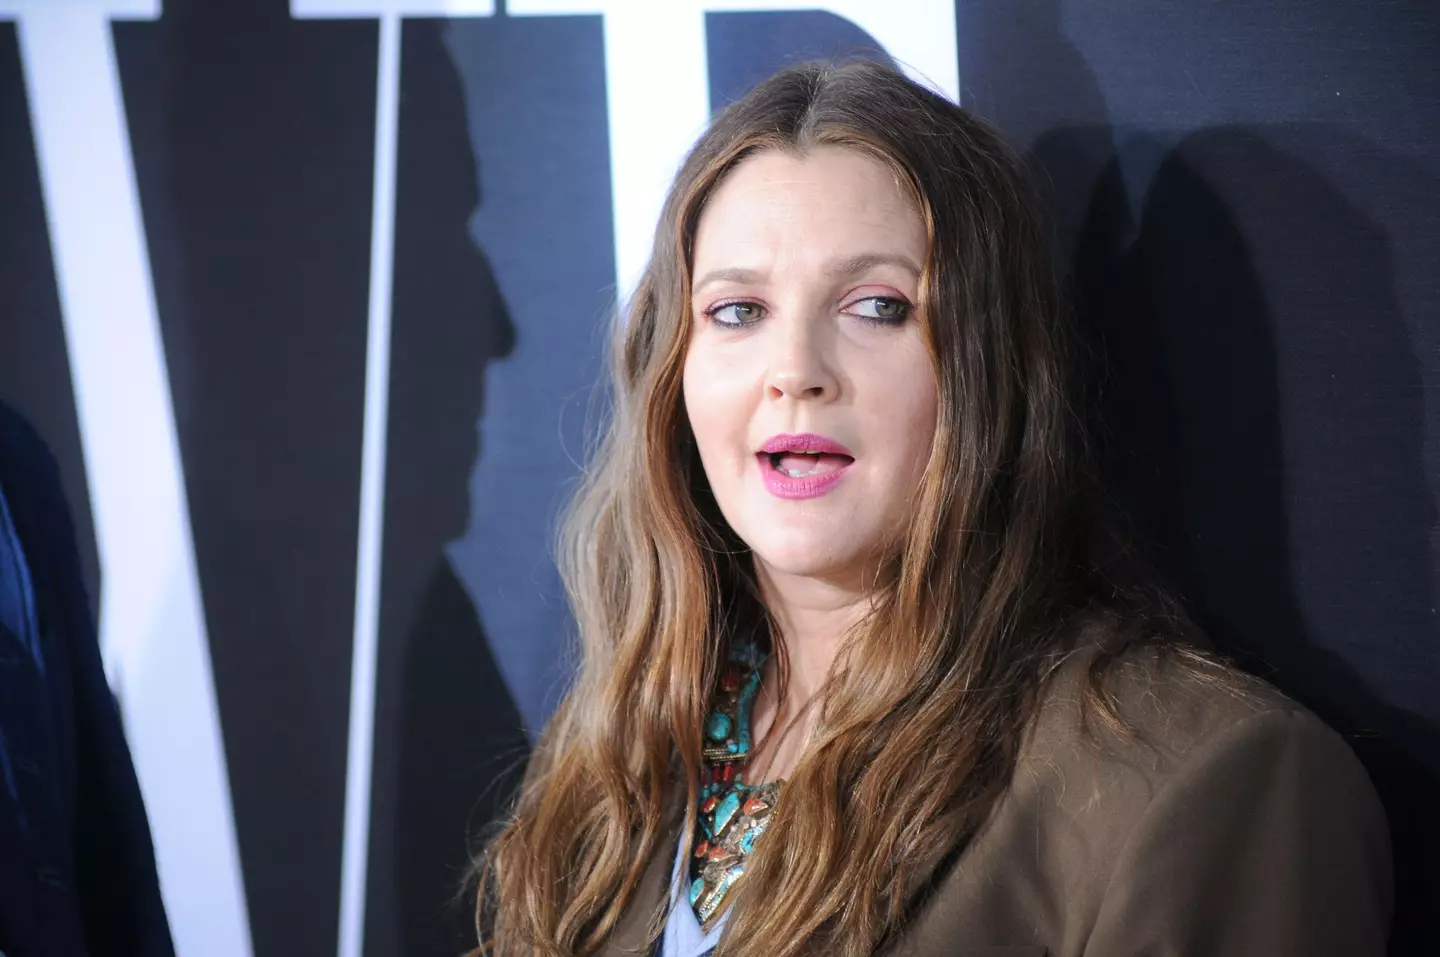 Barrymore said she can happily go without sex for years.